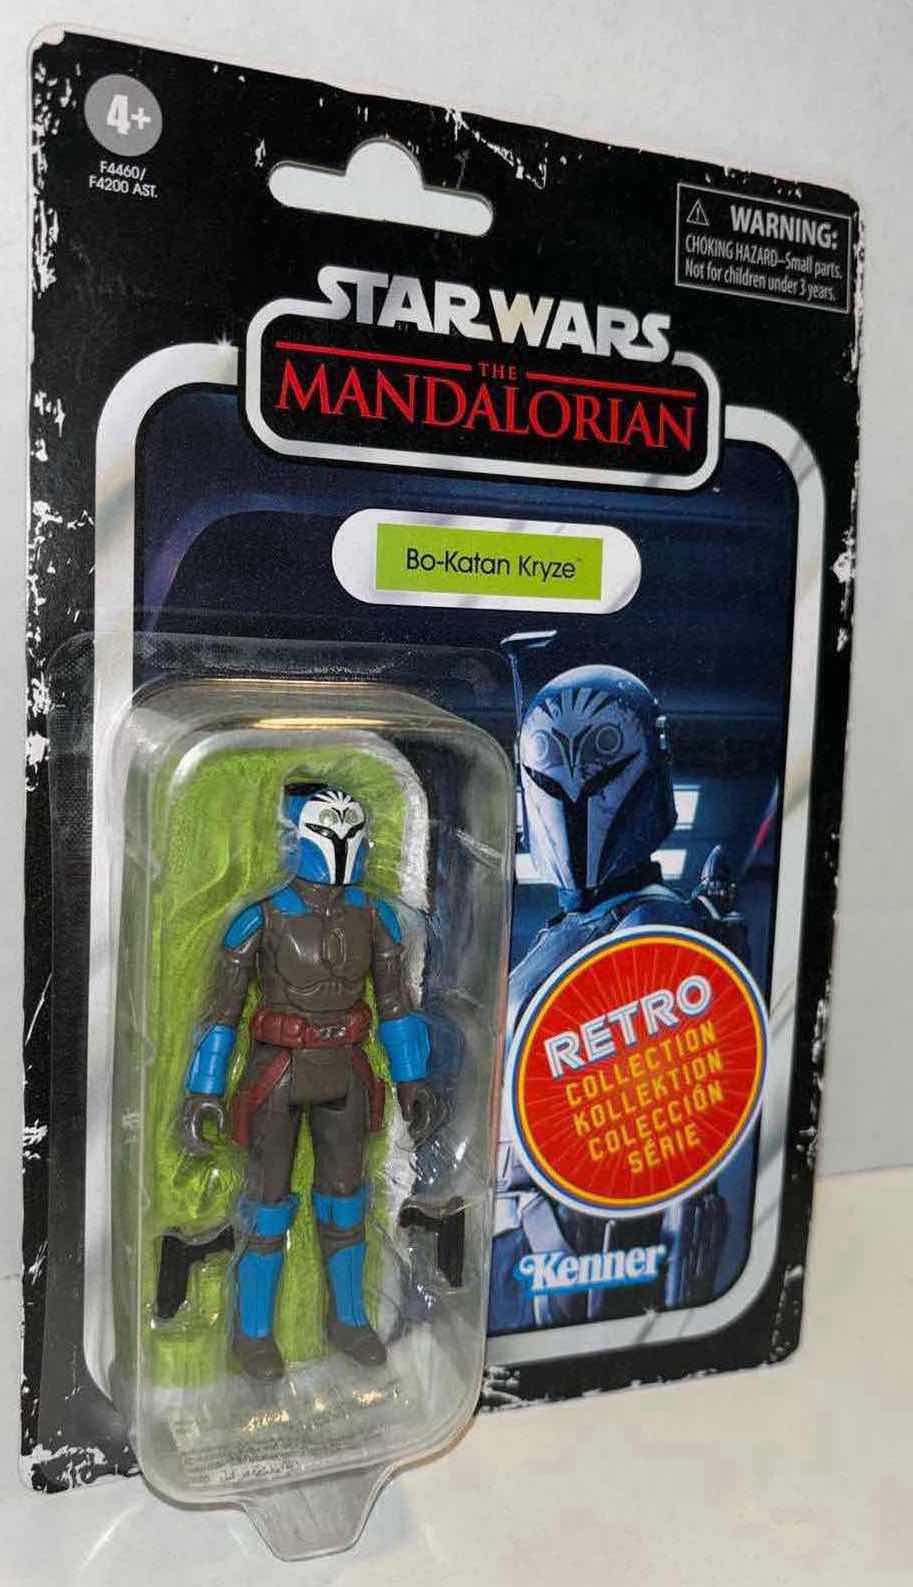 Photo 1 of NEW STAR WARS THE MANDALORIAN 3.75” THE RETRO COLLECTION ACTION FIGURE & ACCESSORIES, “BO-KATAN KRYZE” (1)